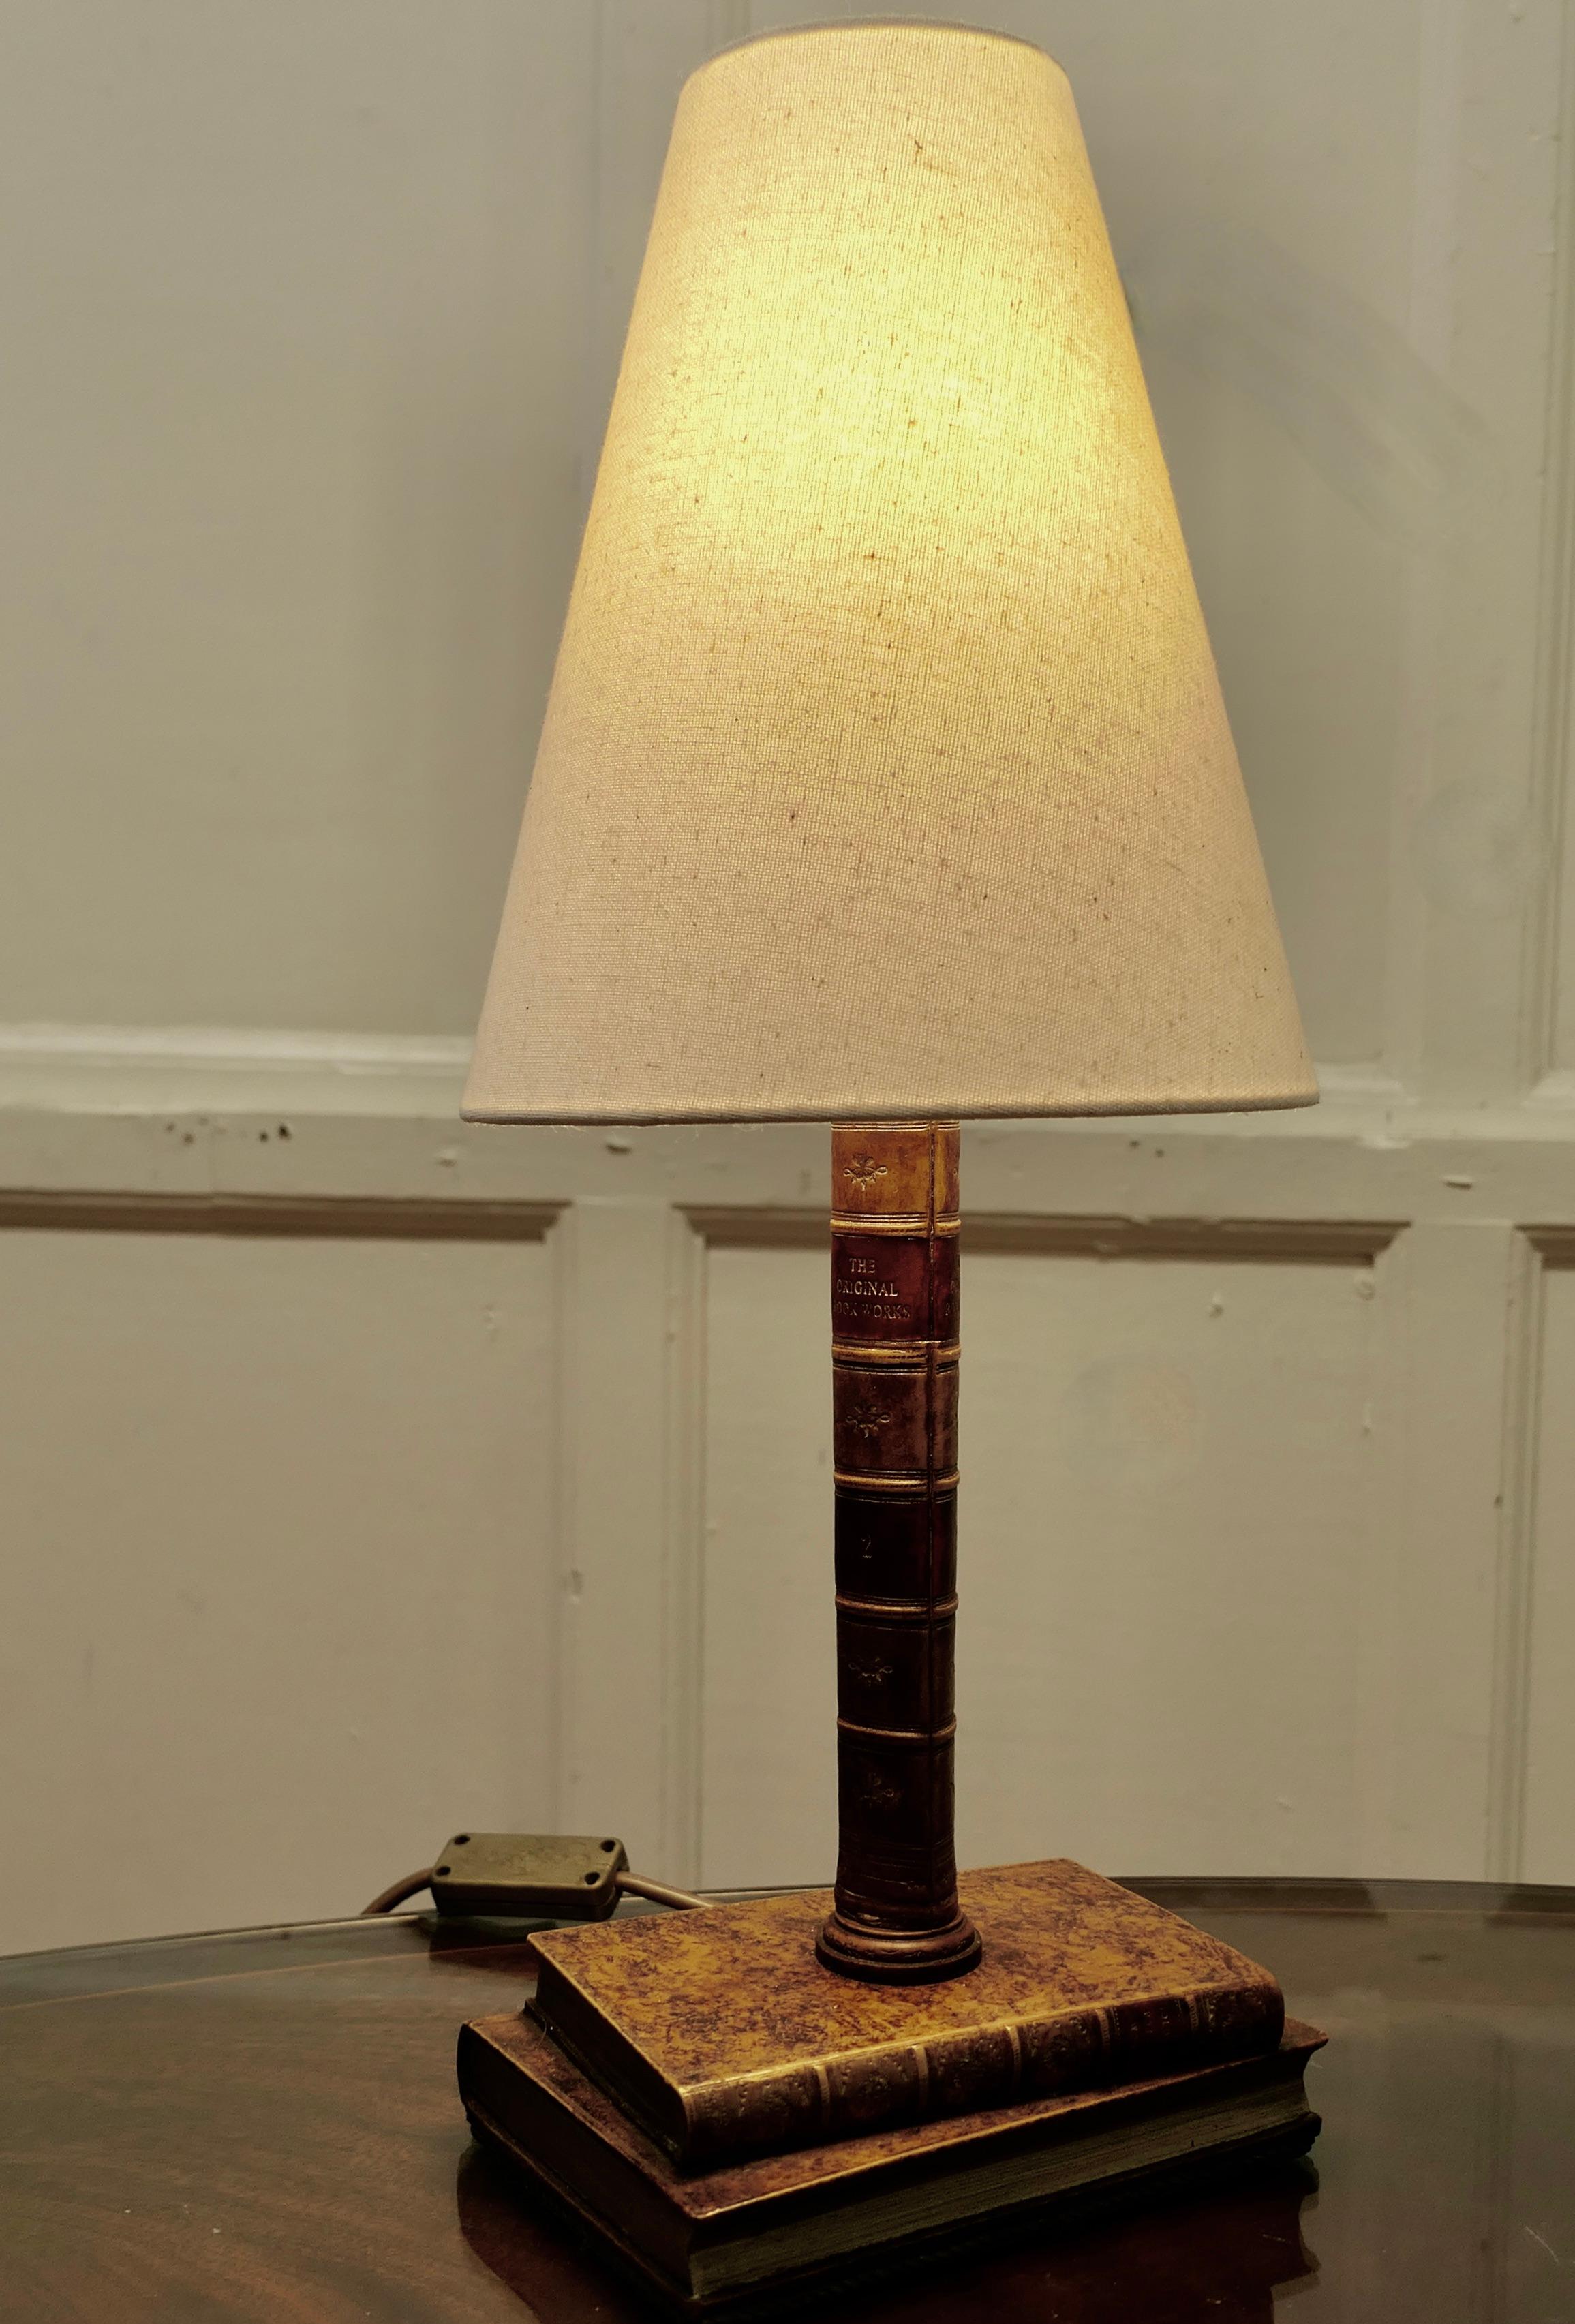 Vintage Novelty Ceramic Trompe-L’oeil Desk Lamp In Good Condition For Sale In Chillerton, Isle of Wight